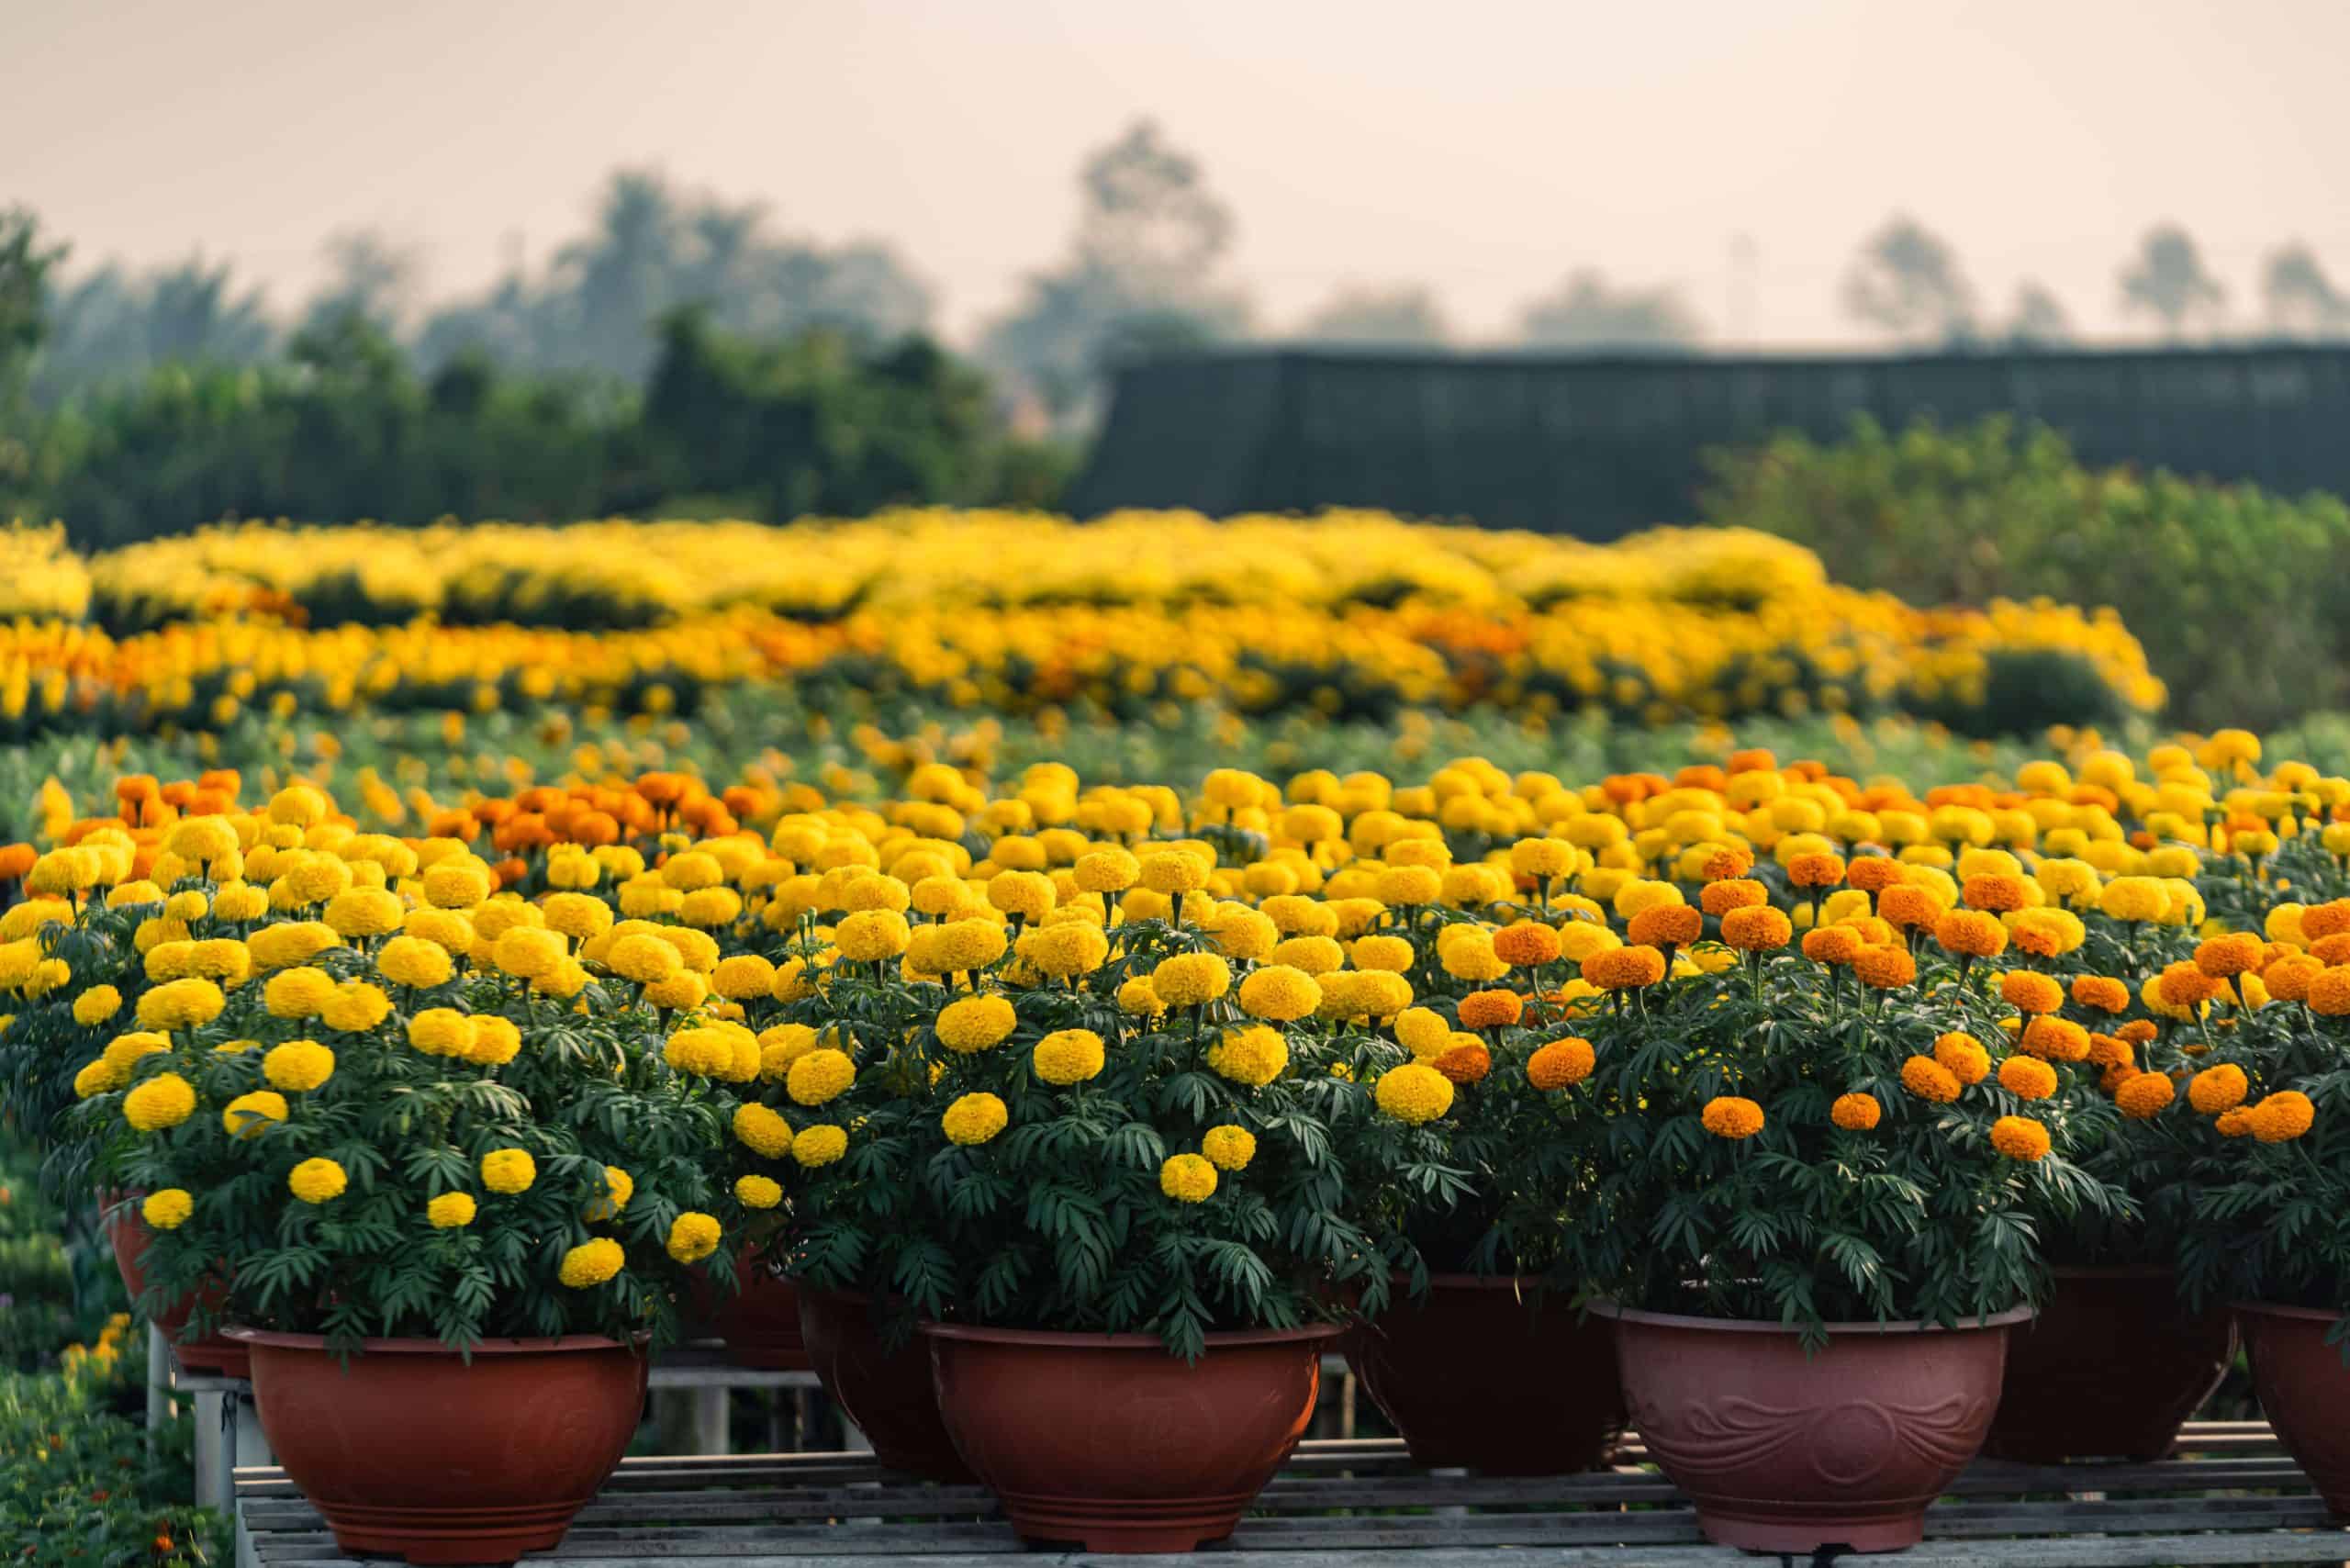 Marigold flowers in a home garden, showcasing the vibrant charm of Garden Plants.